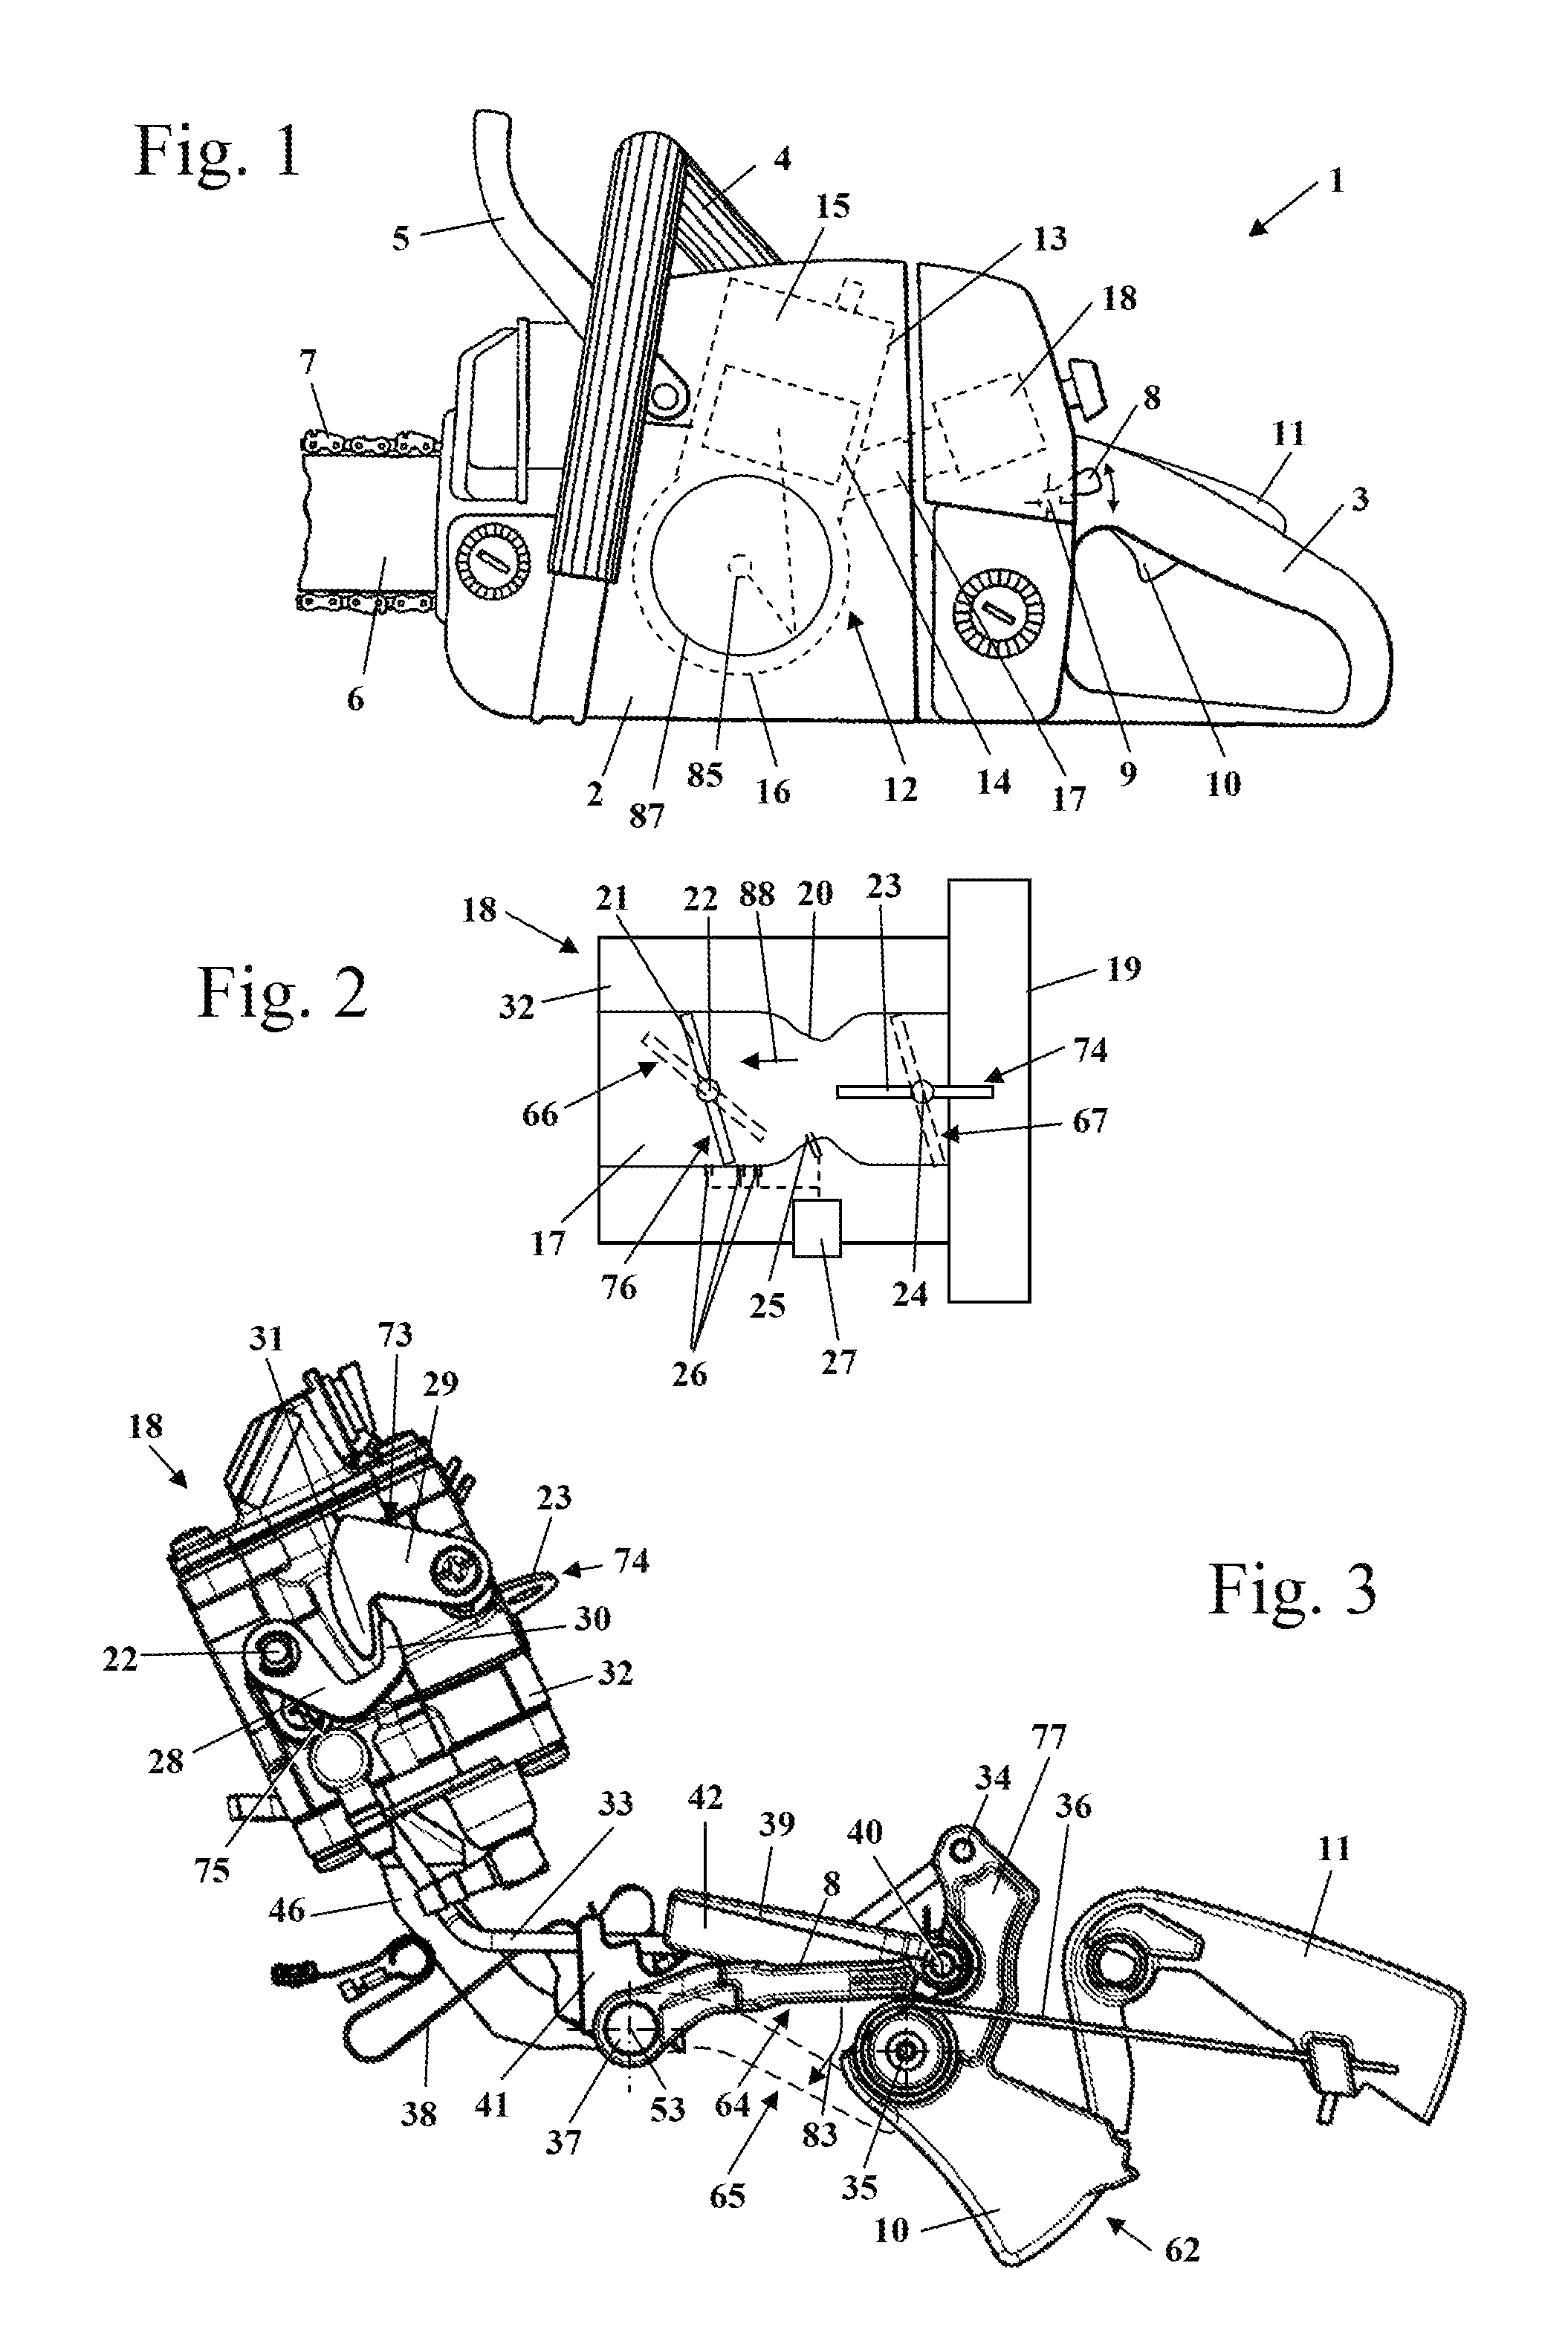 Hand-held power tool with an internal combustion engine